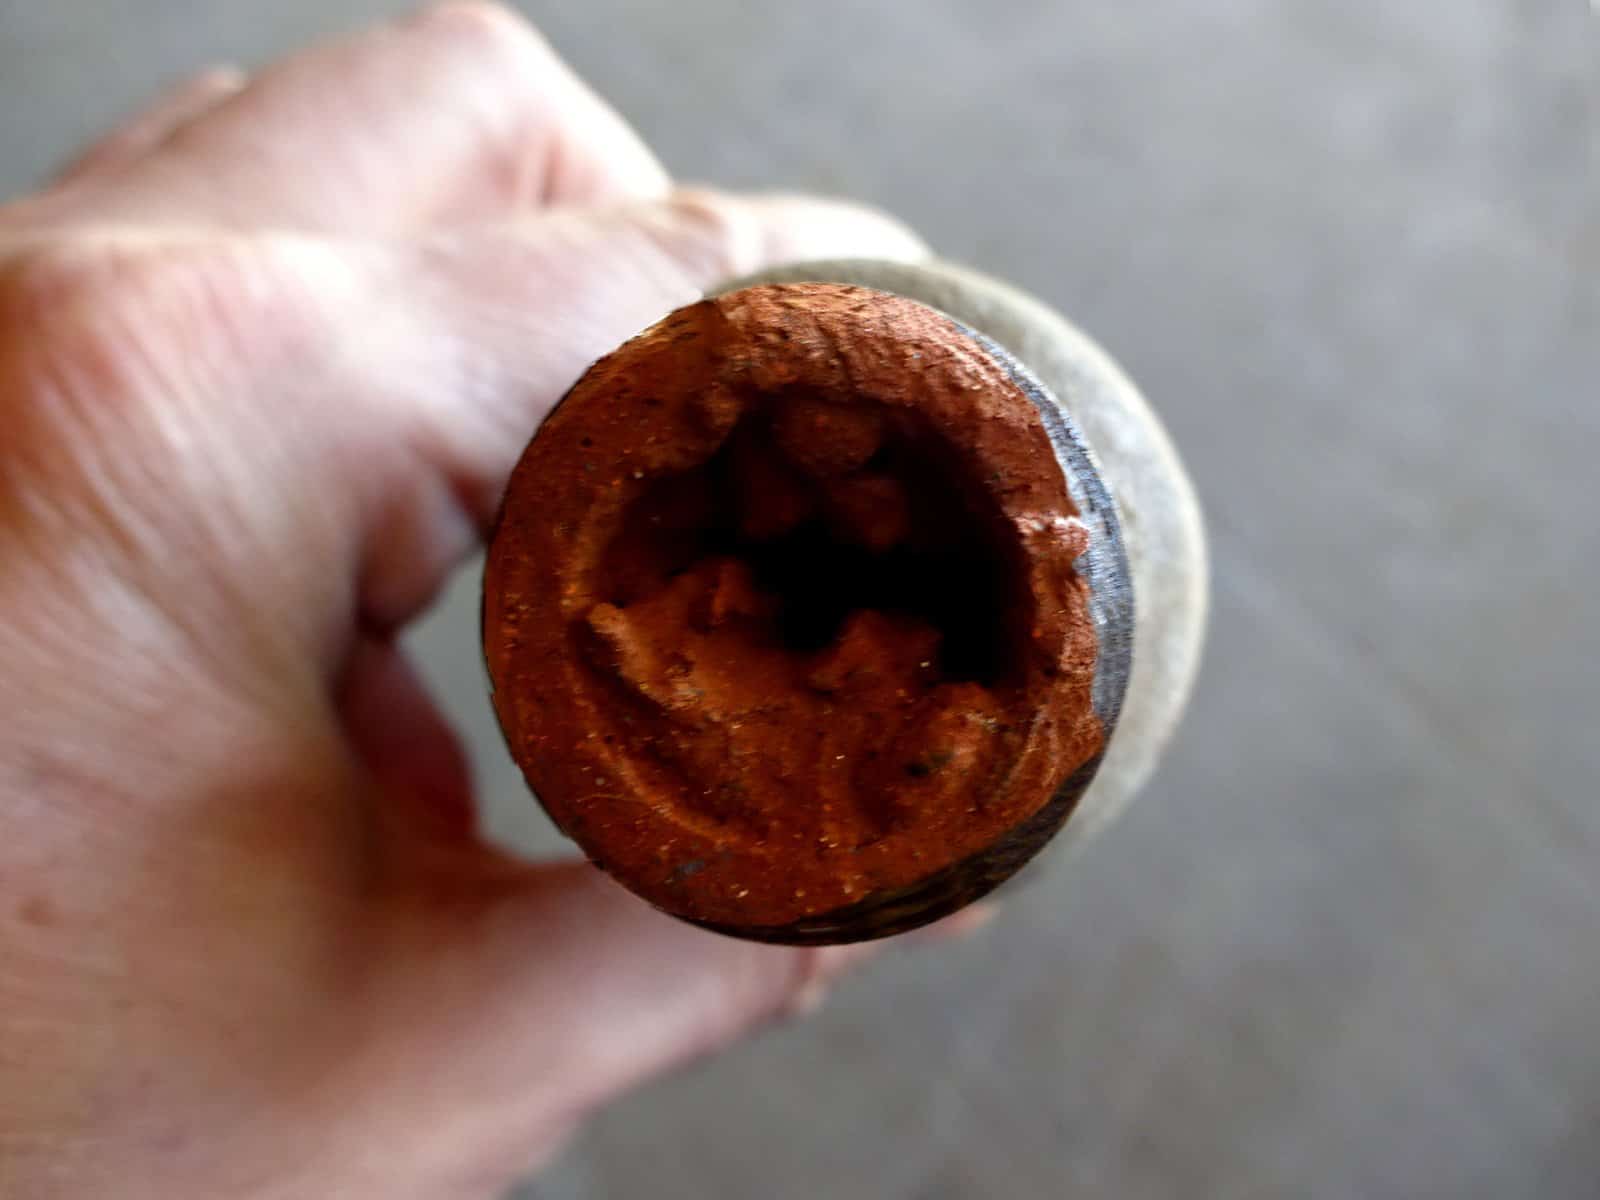 Galvanized pipe fitting that caused a clogged water main.